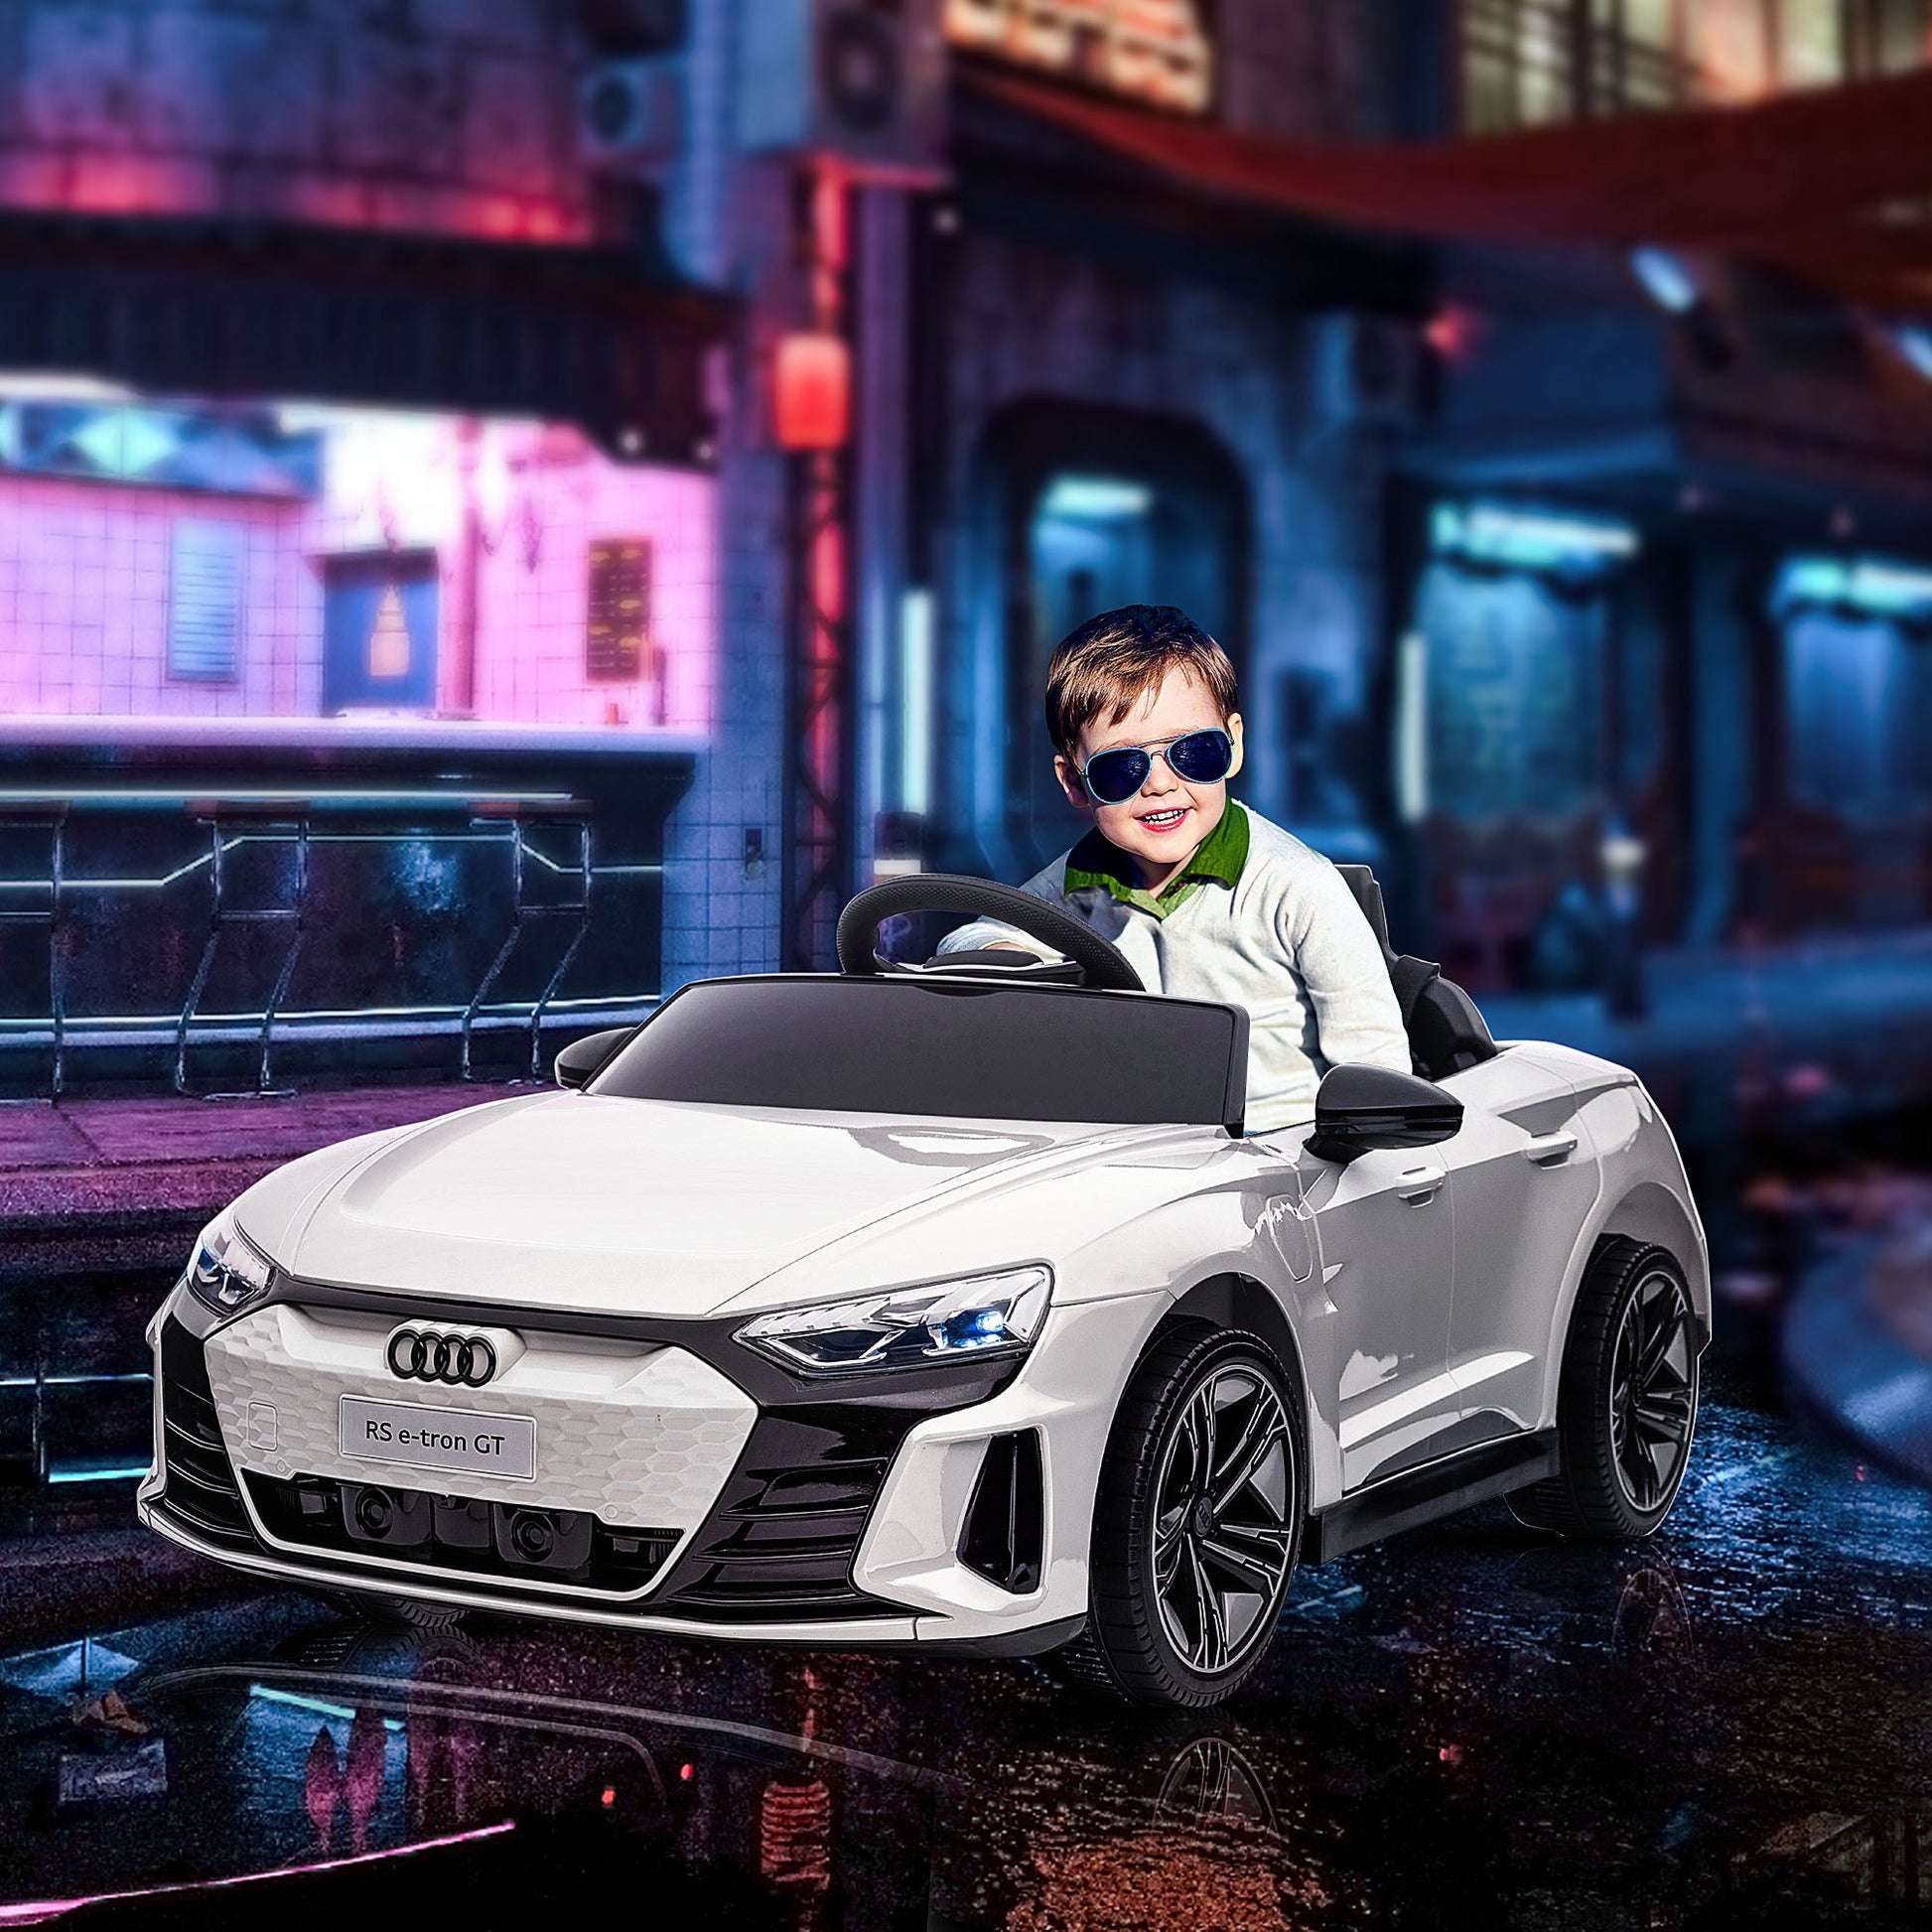 Electric Ride On Car with Remote Control, 12V 3.1 MPH Kids Ride-On Toy for Boys and Girls with Suspension System, Horn Honking, Music, Lights, White - Gallery Canada